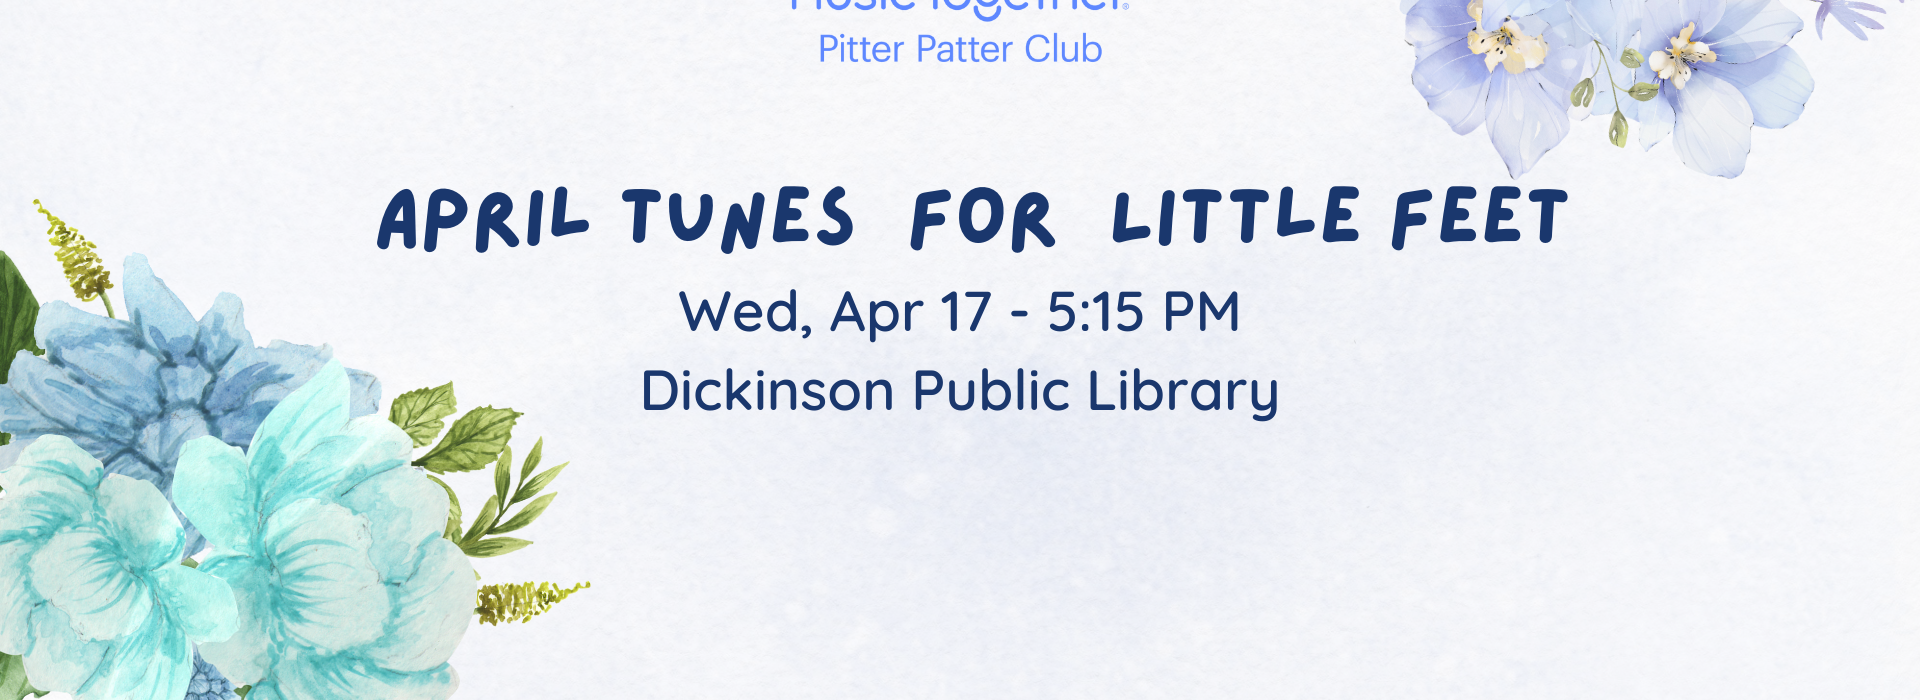 Pitter Patter Club on Wednesday, April 17th at 5:15pm